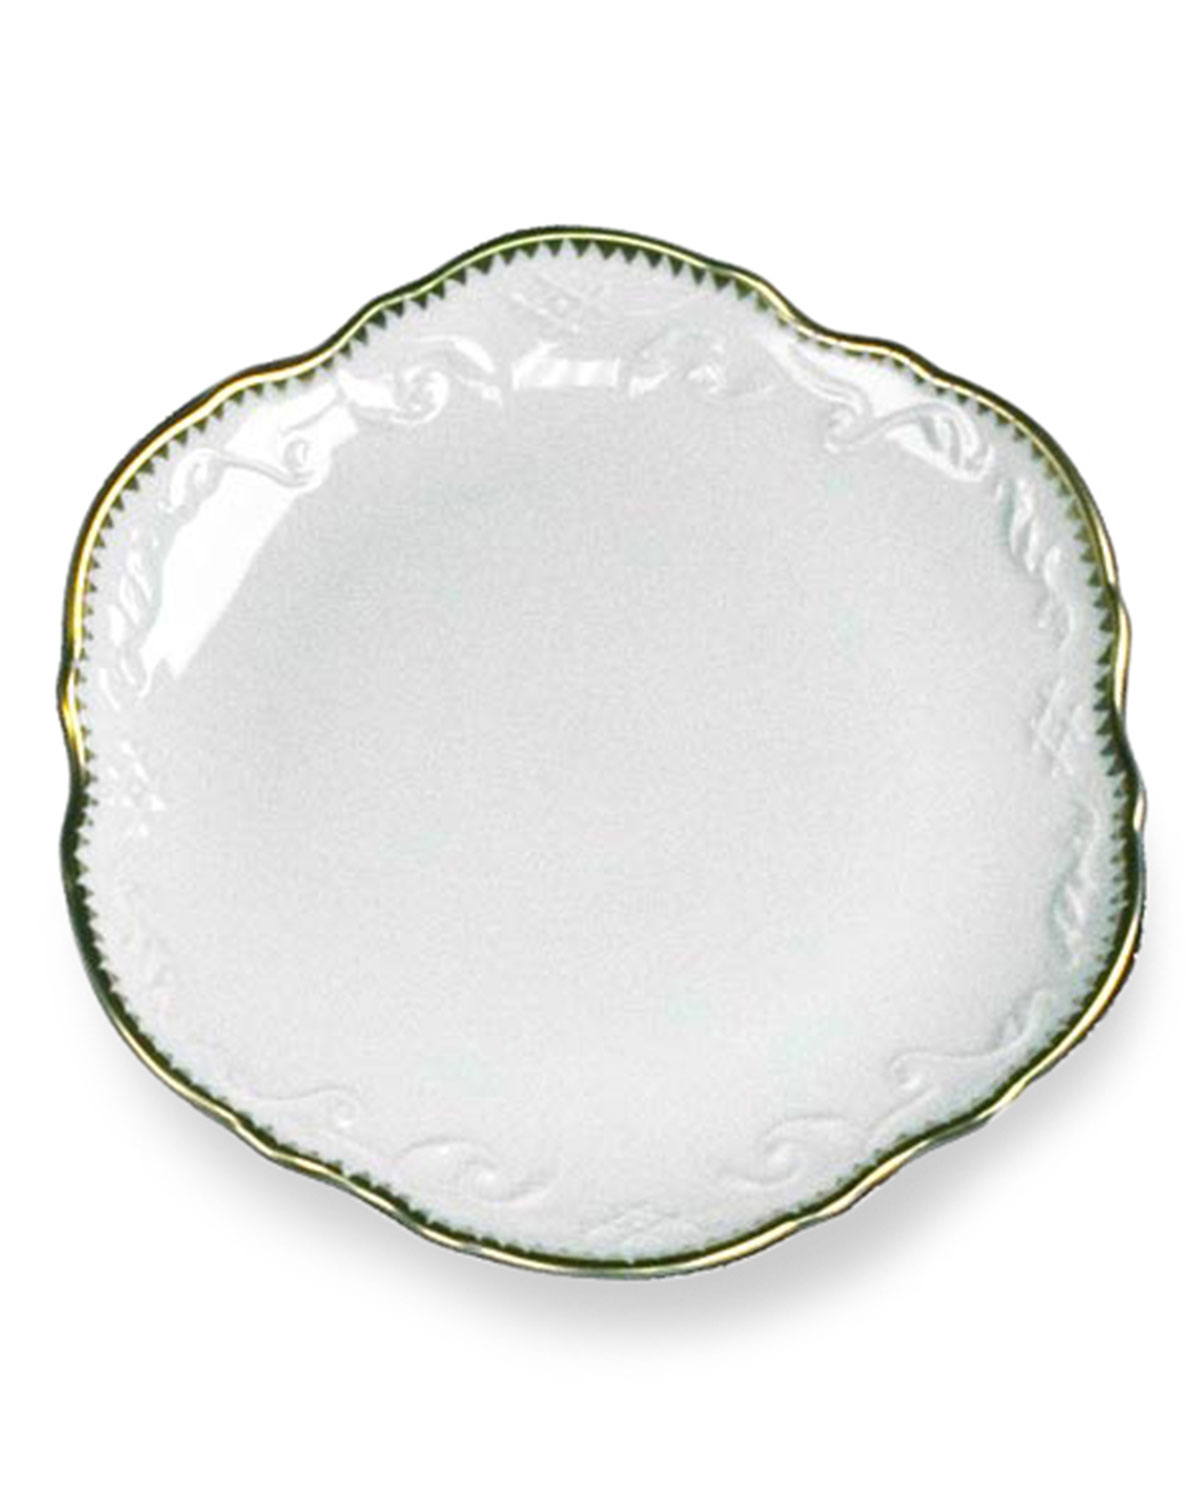 ANNA WEATHERLEY SIMPLY ANNA BREAD & BUTTER PLATE,PROD193432105